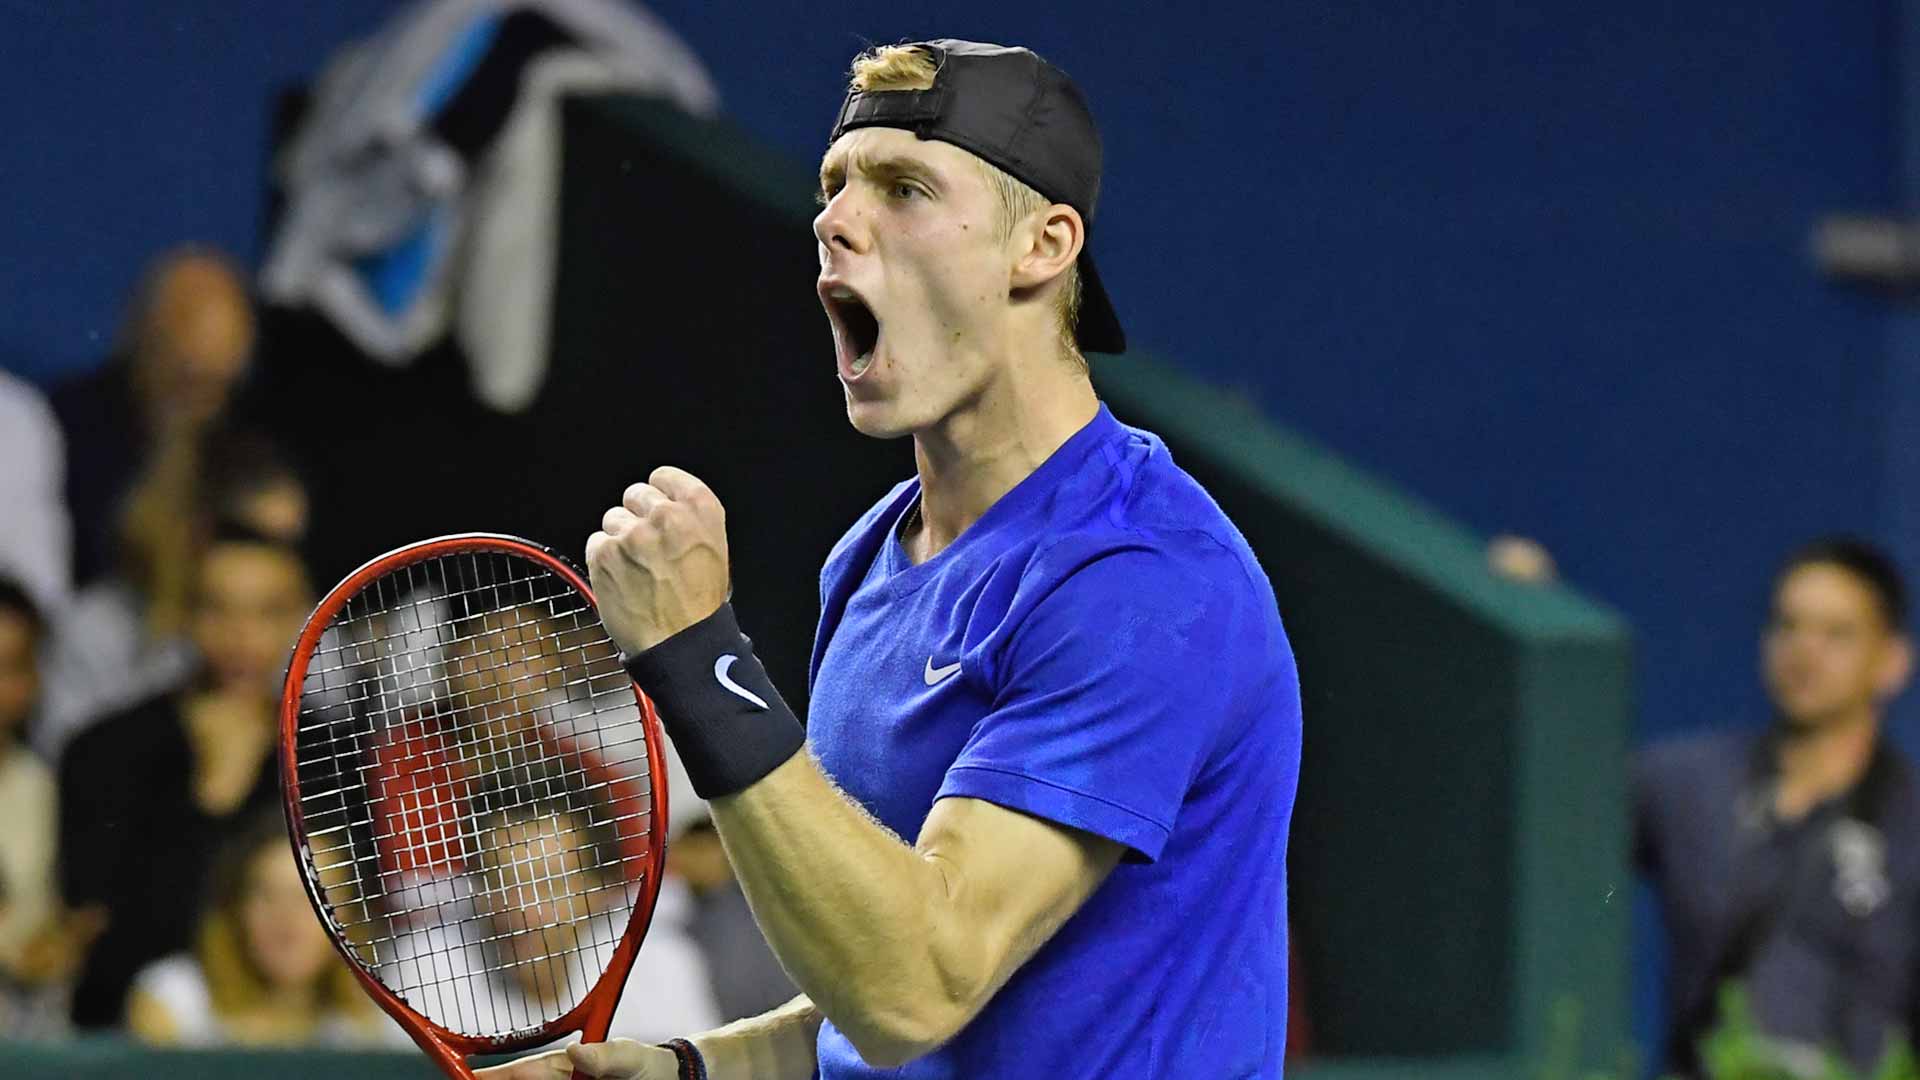 <a href='https://www.atptour.com/en/players/denis-shapovalov/su55/overview'>Denis Shapovalov</a> earns his third Top 10 win on Thursday at the <a href='https://www.atptour.com/en/tournaments/paris/352/overview'>Rolex Paris Masters</a>.